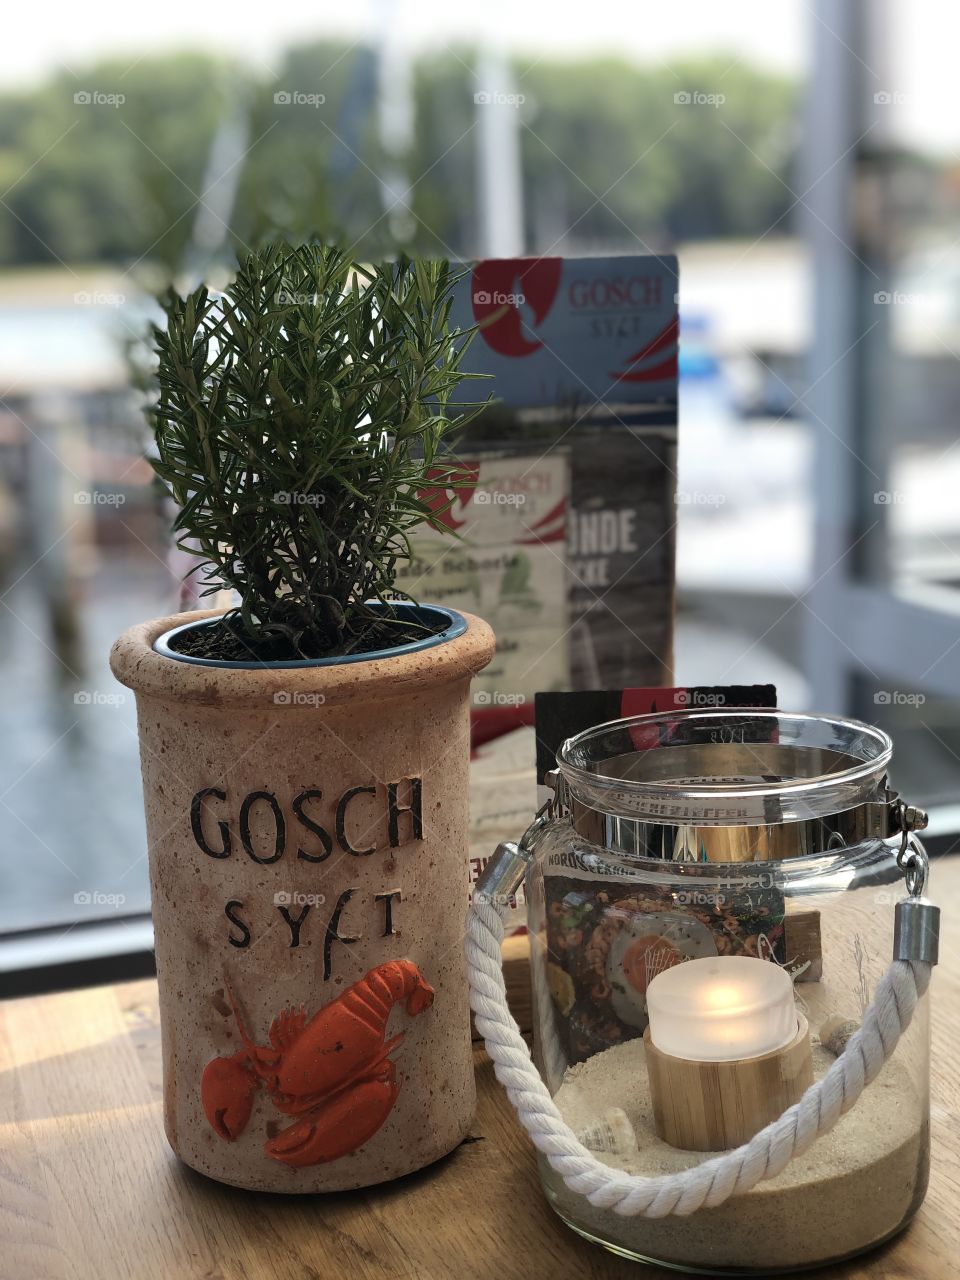 In love with Gosch Sylt